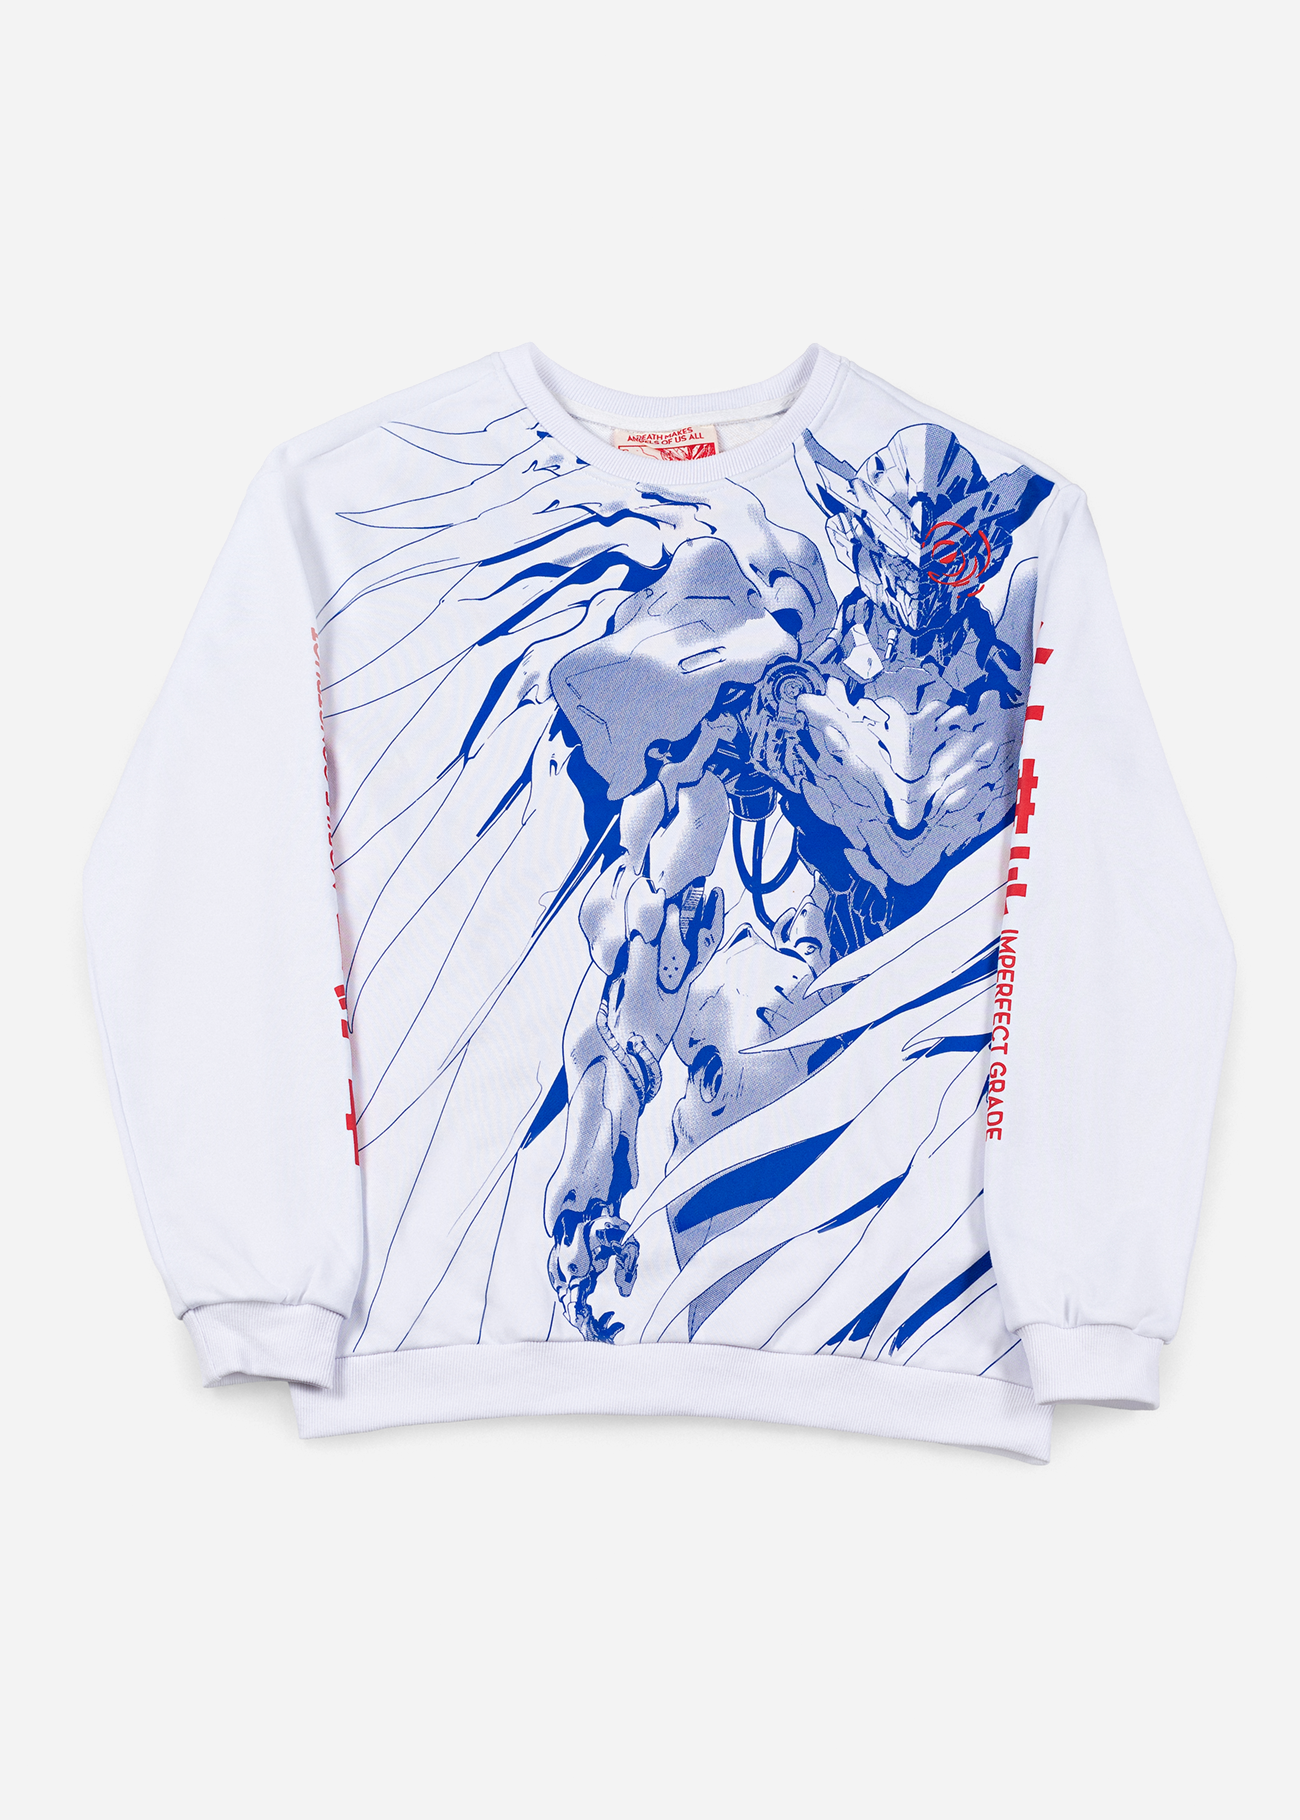 Front facing photo of the Sky Killer design, featuring a large mecha anime design screen printed on the front of a white anime sweater